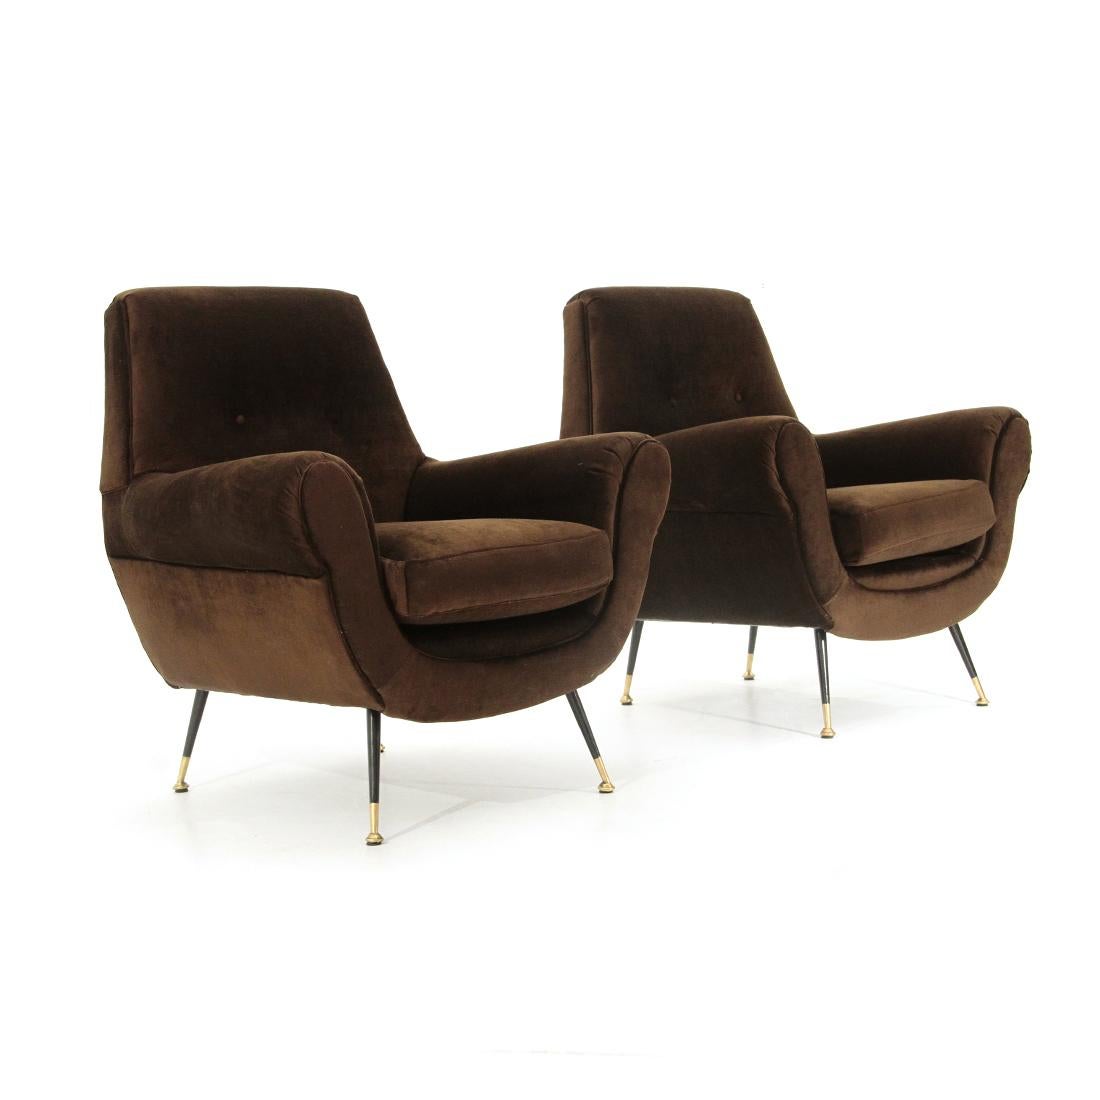 Pair of Italian made armchairs produced in the 1960s.
Wooden structure padded and lined with new brown velvet fabric.
Legs in black painted metal with brass tips and feet.
Good general conditions.

Dimensions: Length 85 cm, Height 58/76 cm.